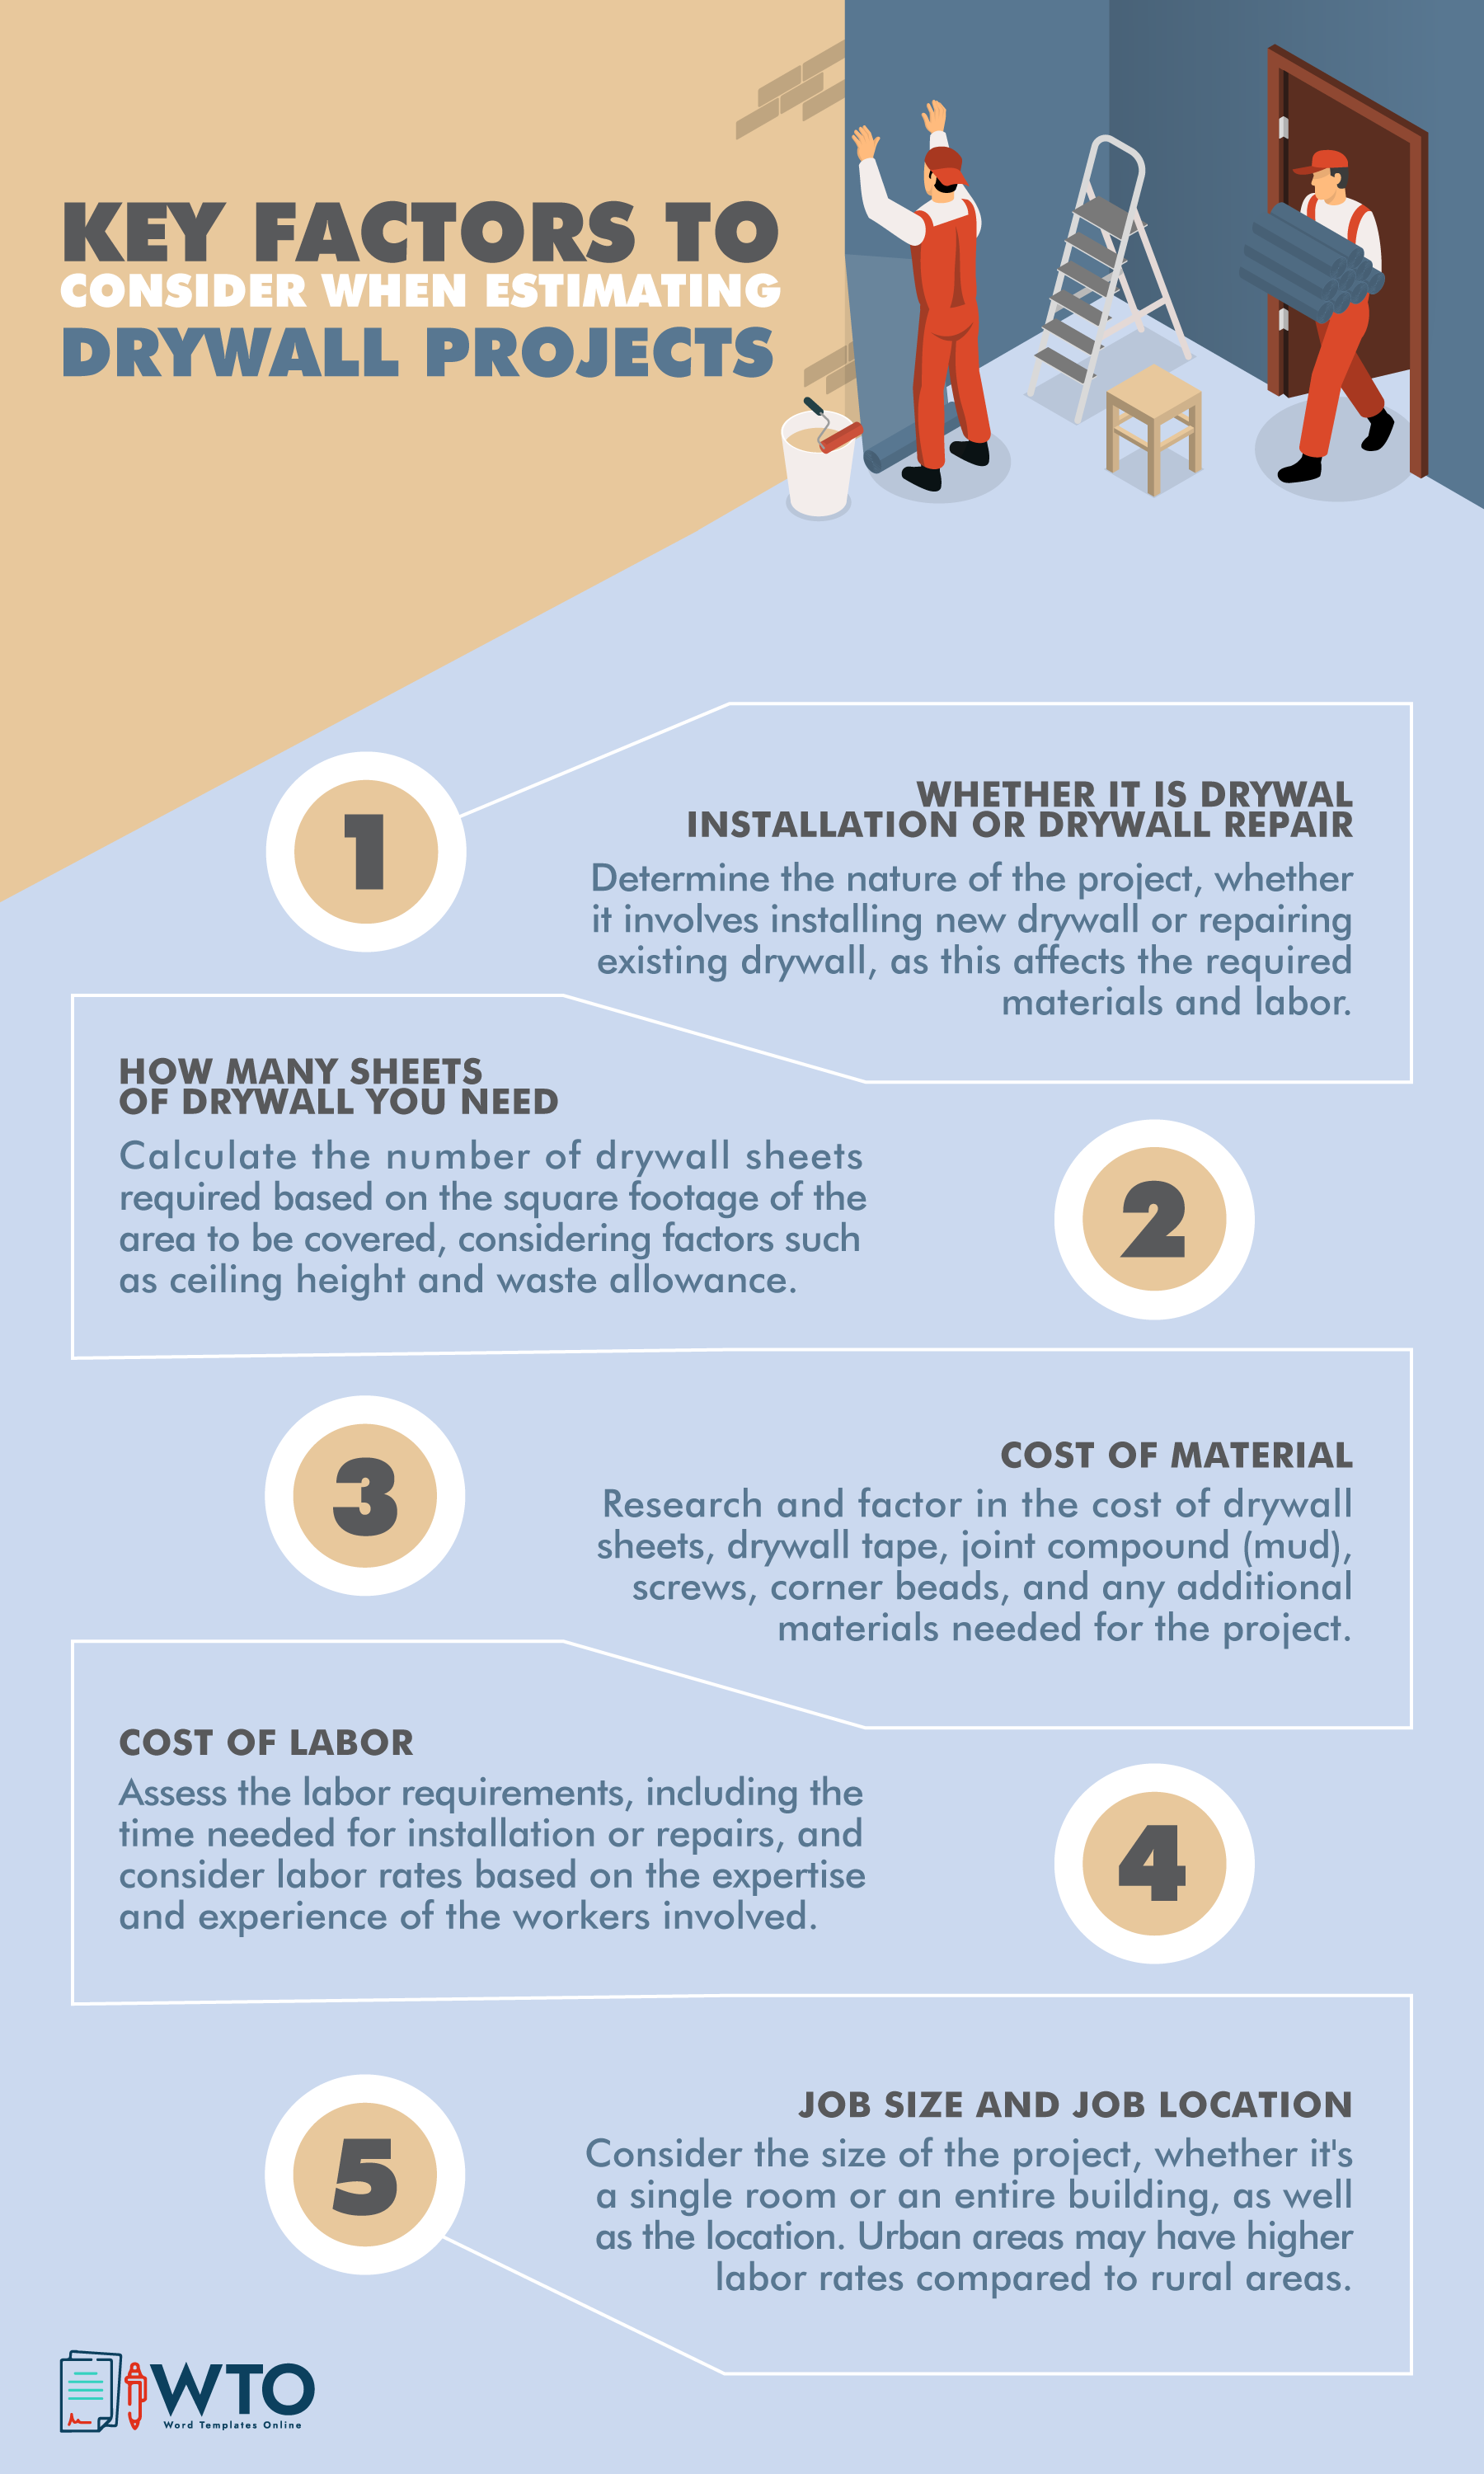 This infographic is about the key factors to estimate drywall projects.